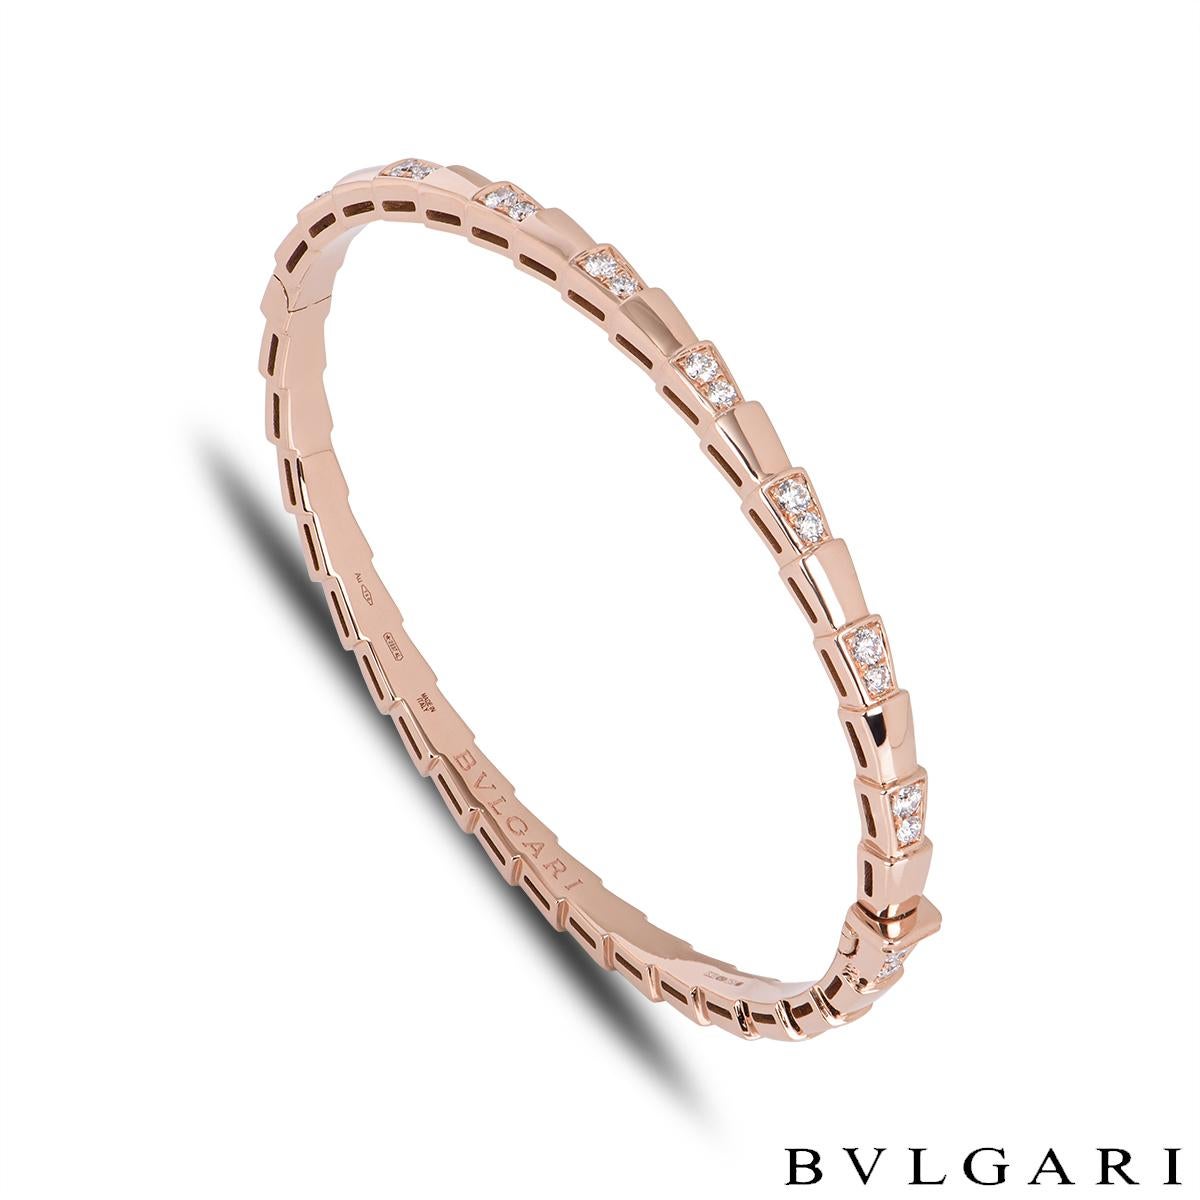 A stunning 18k rose gold diamond bracelet by Bvlgari from the Serpenti collection. The bracelet is in the form of a serpent and beautifully alternates between high polish and diamond sections that evoke the viper's spiral move before it strikes. The